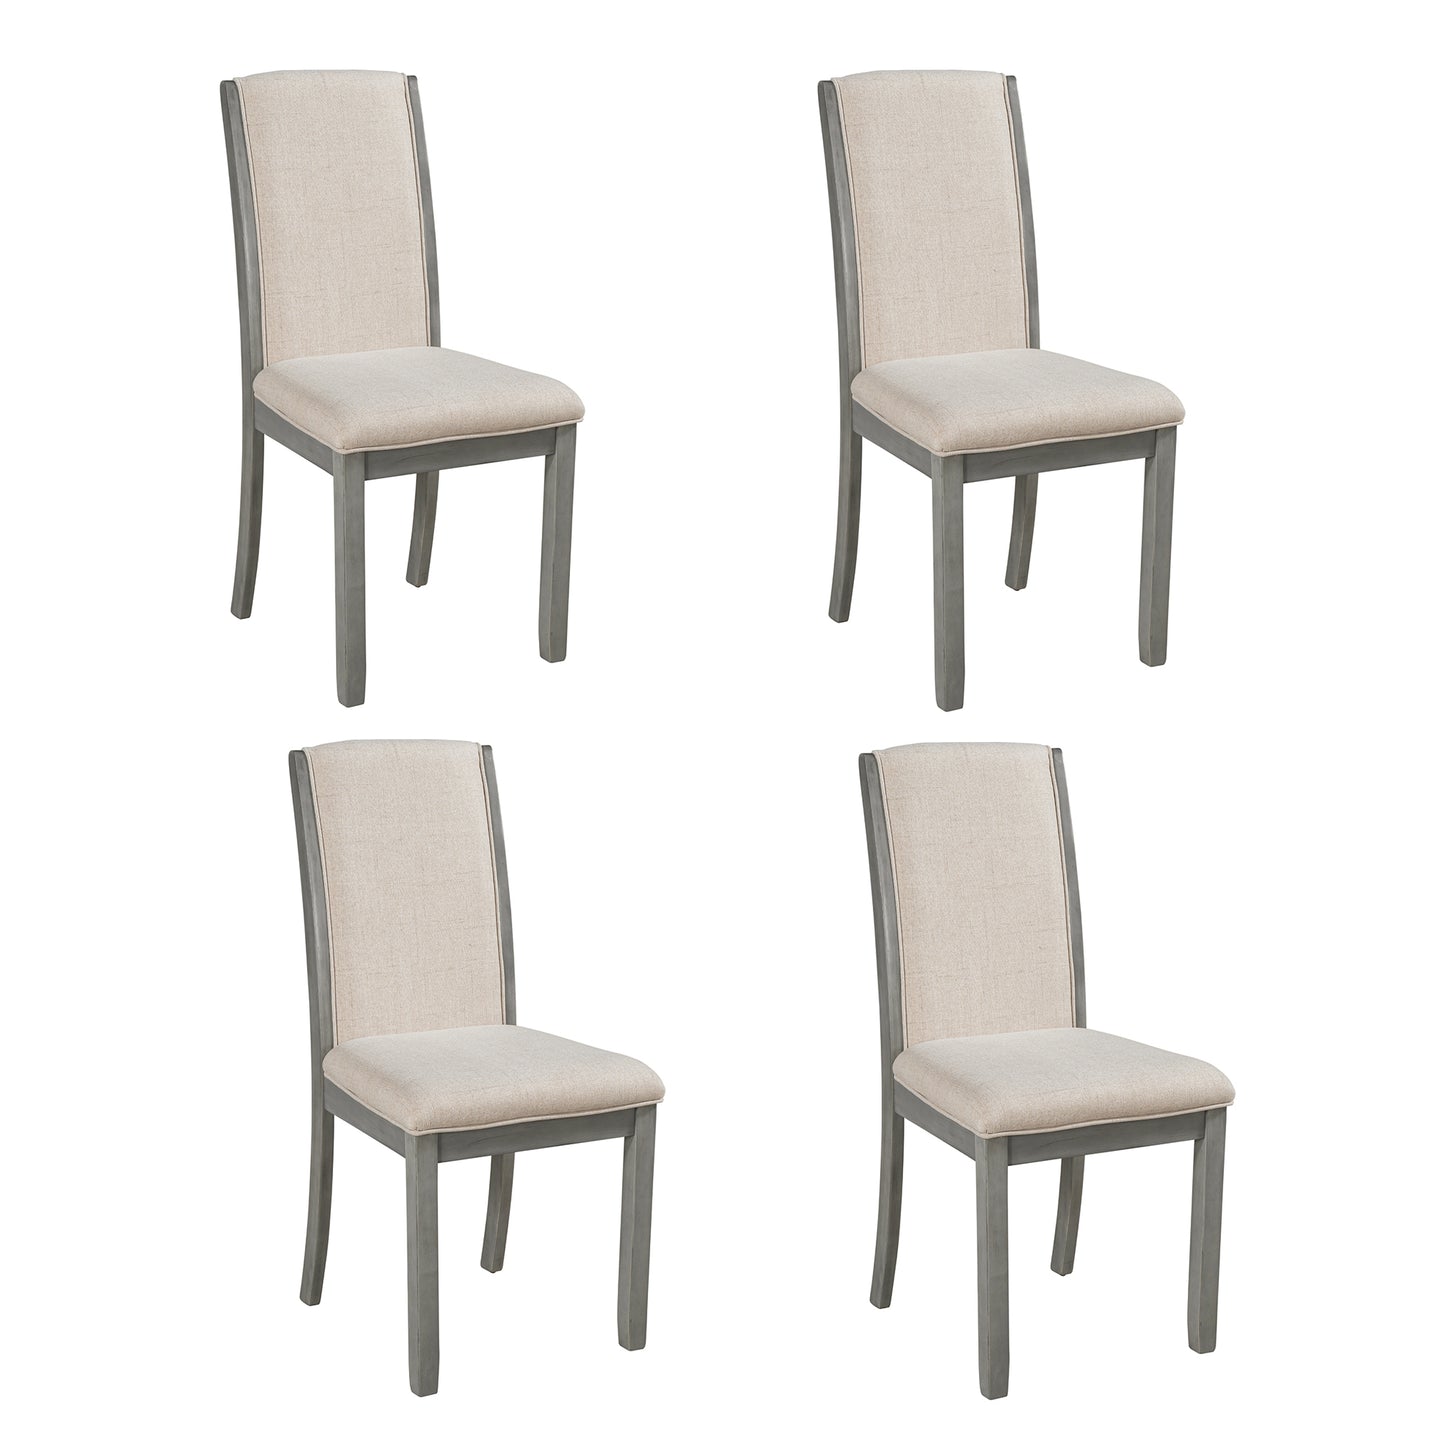 Rentford Farmhouse 4-Piece Wood Full Back Dining Chairs Set